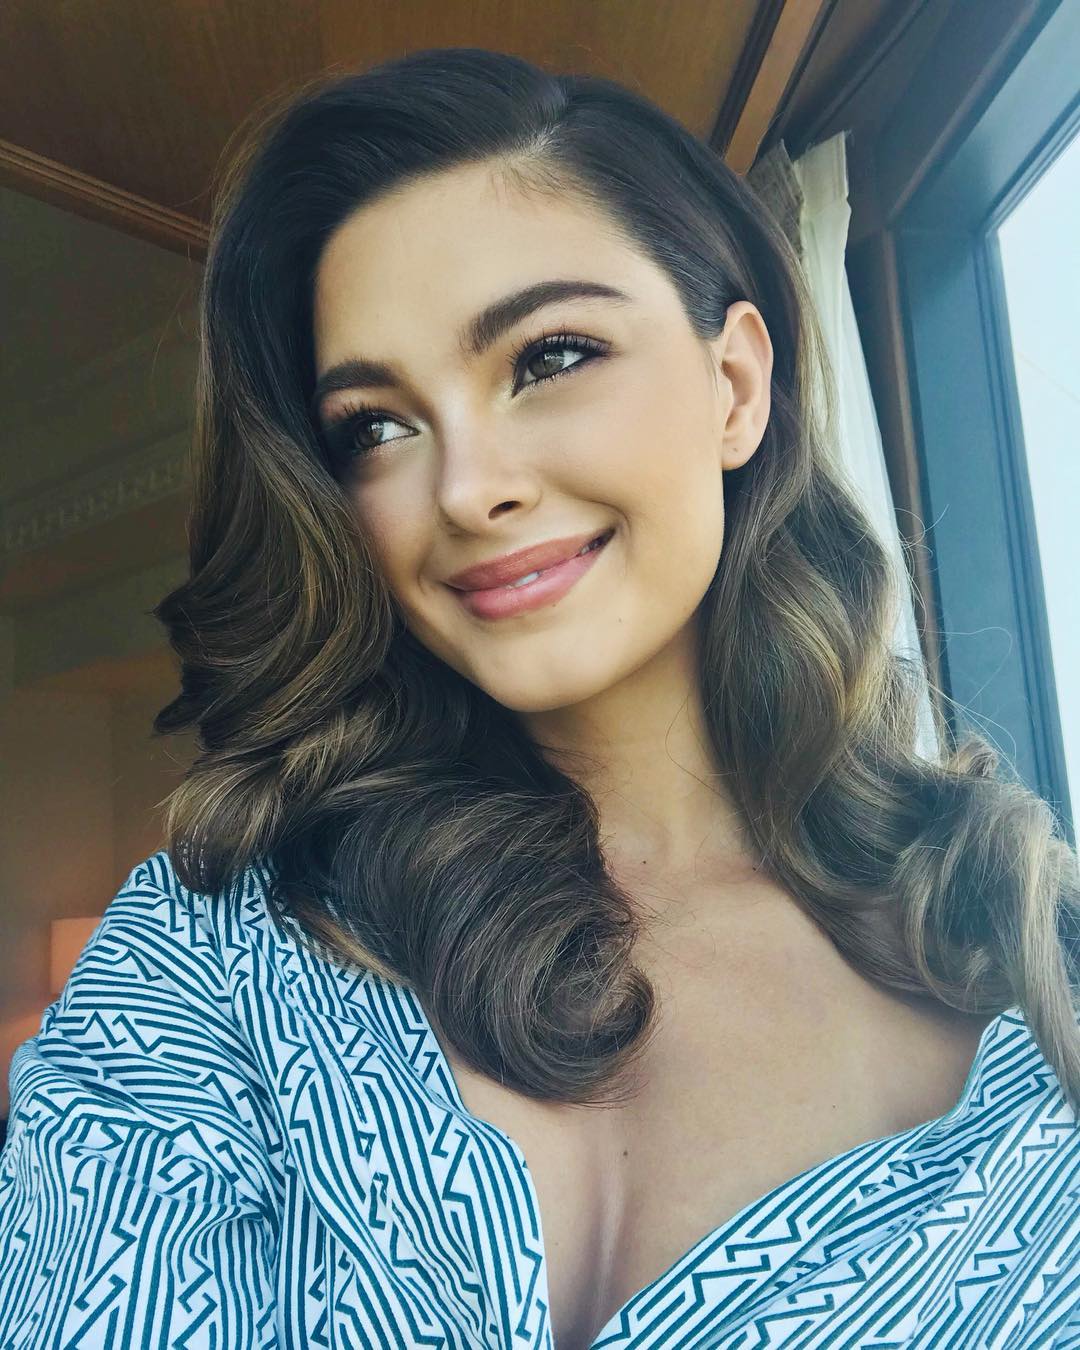 Demi-leigh nel-peters pictures